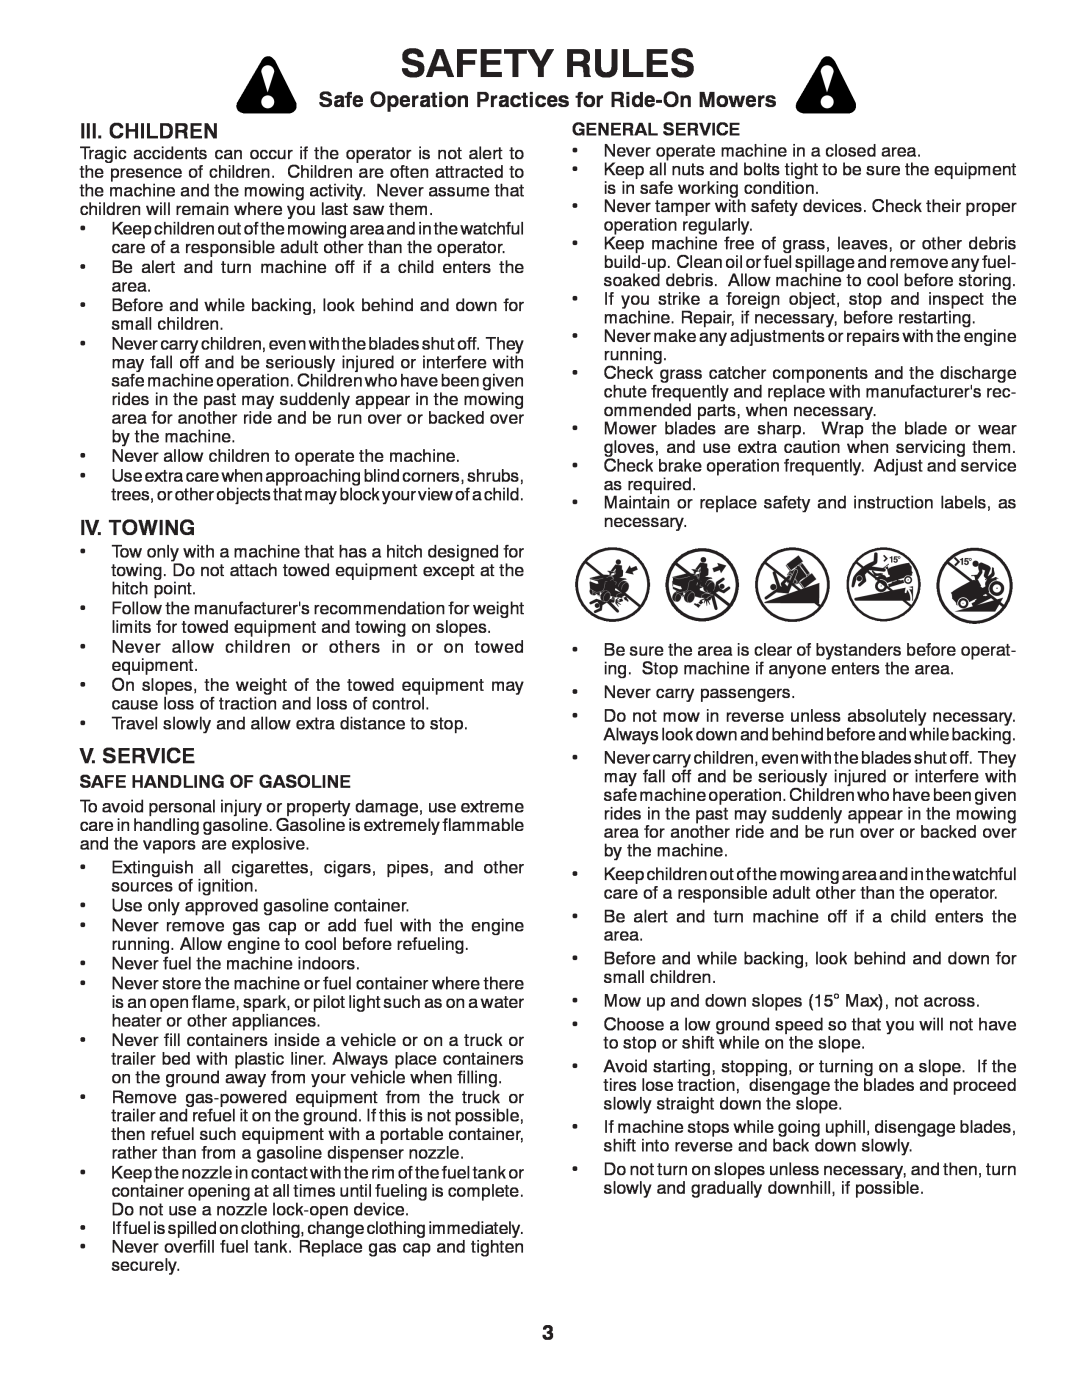 McCulloch 532 42 27-27 Rev. 2 manual Safety Rules, Safe Operation Practices for Ride-OnMowers, Iii. Children, Iv. Towing 